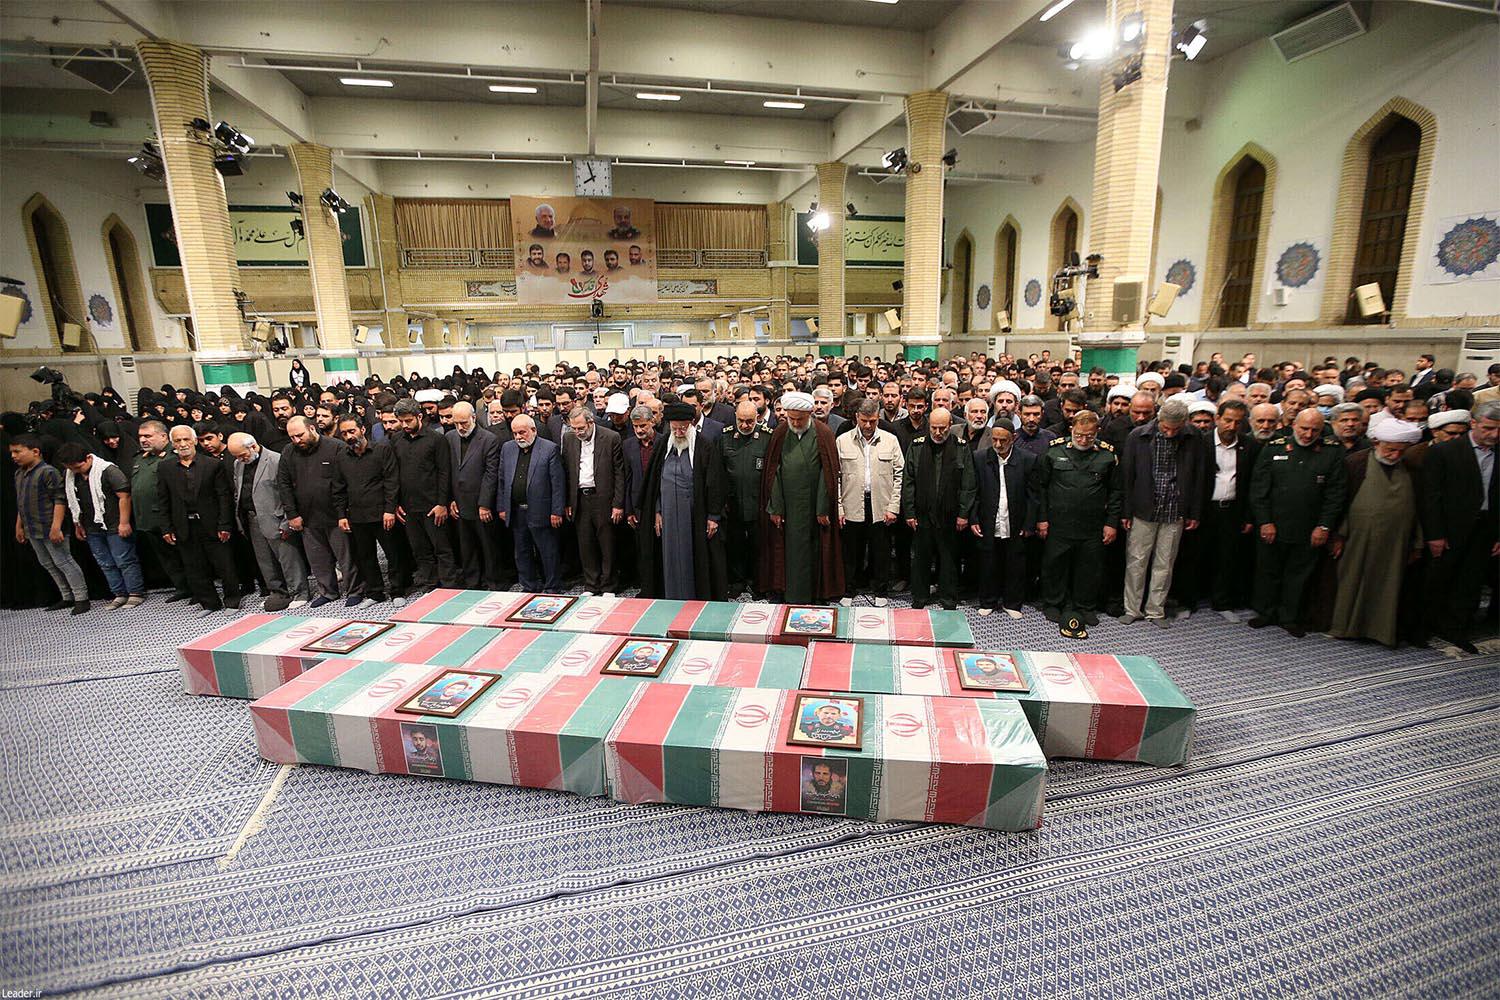 The funeral coincided with the annual Quds (Jerusalem) Day